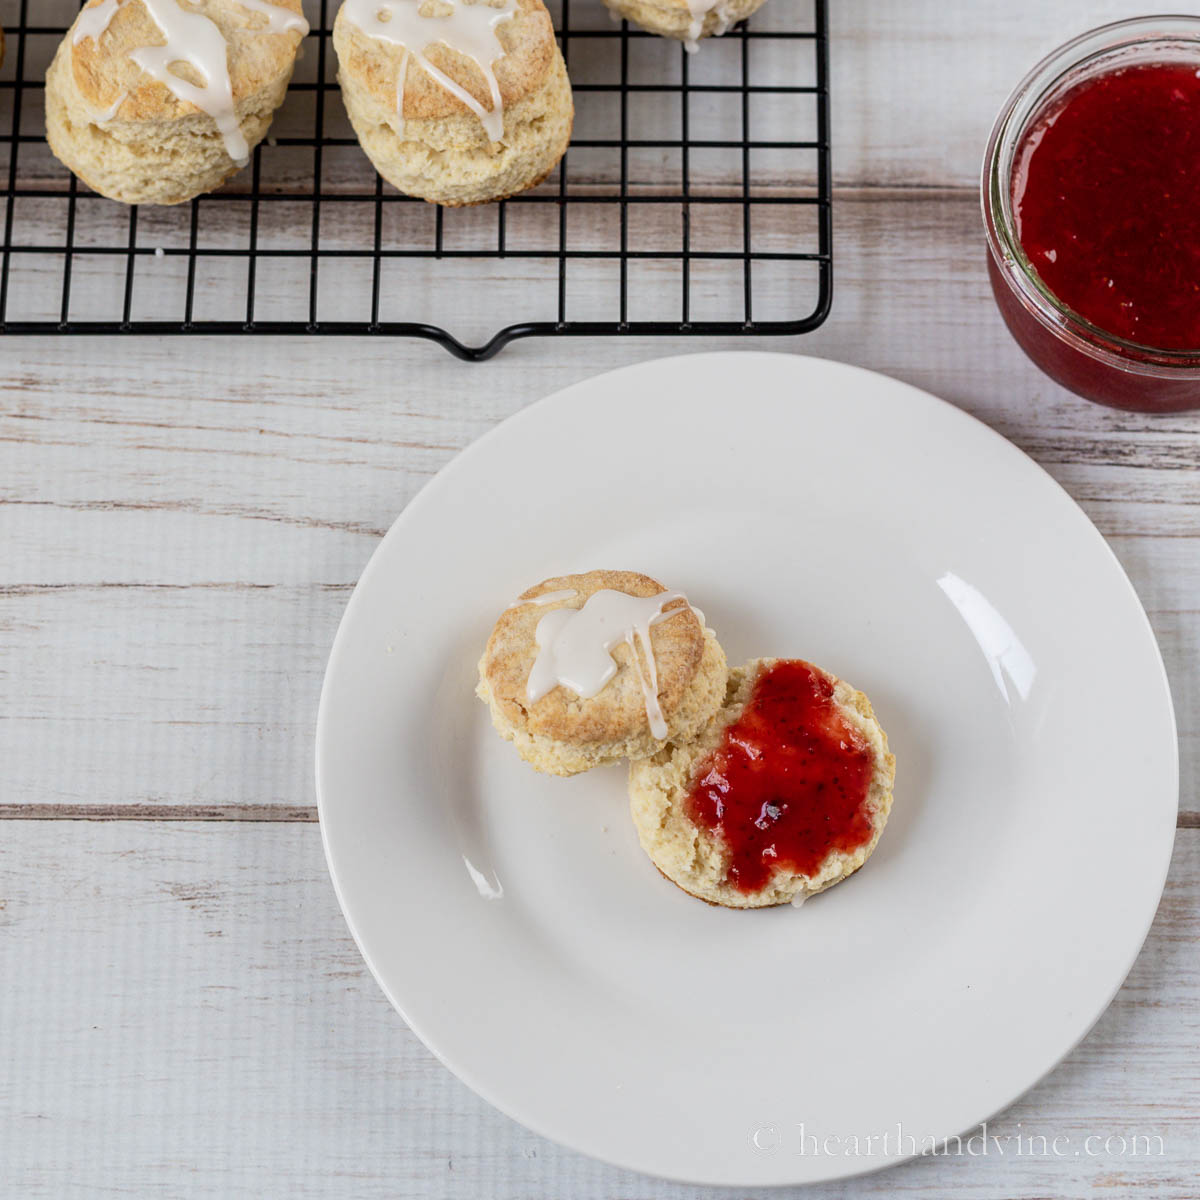 A glazed scone pulled apart with a dollop of strawberry jam on the bottom half.